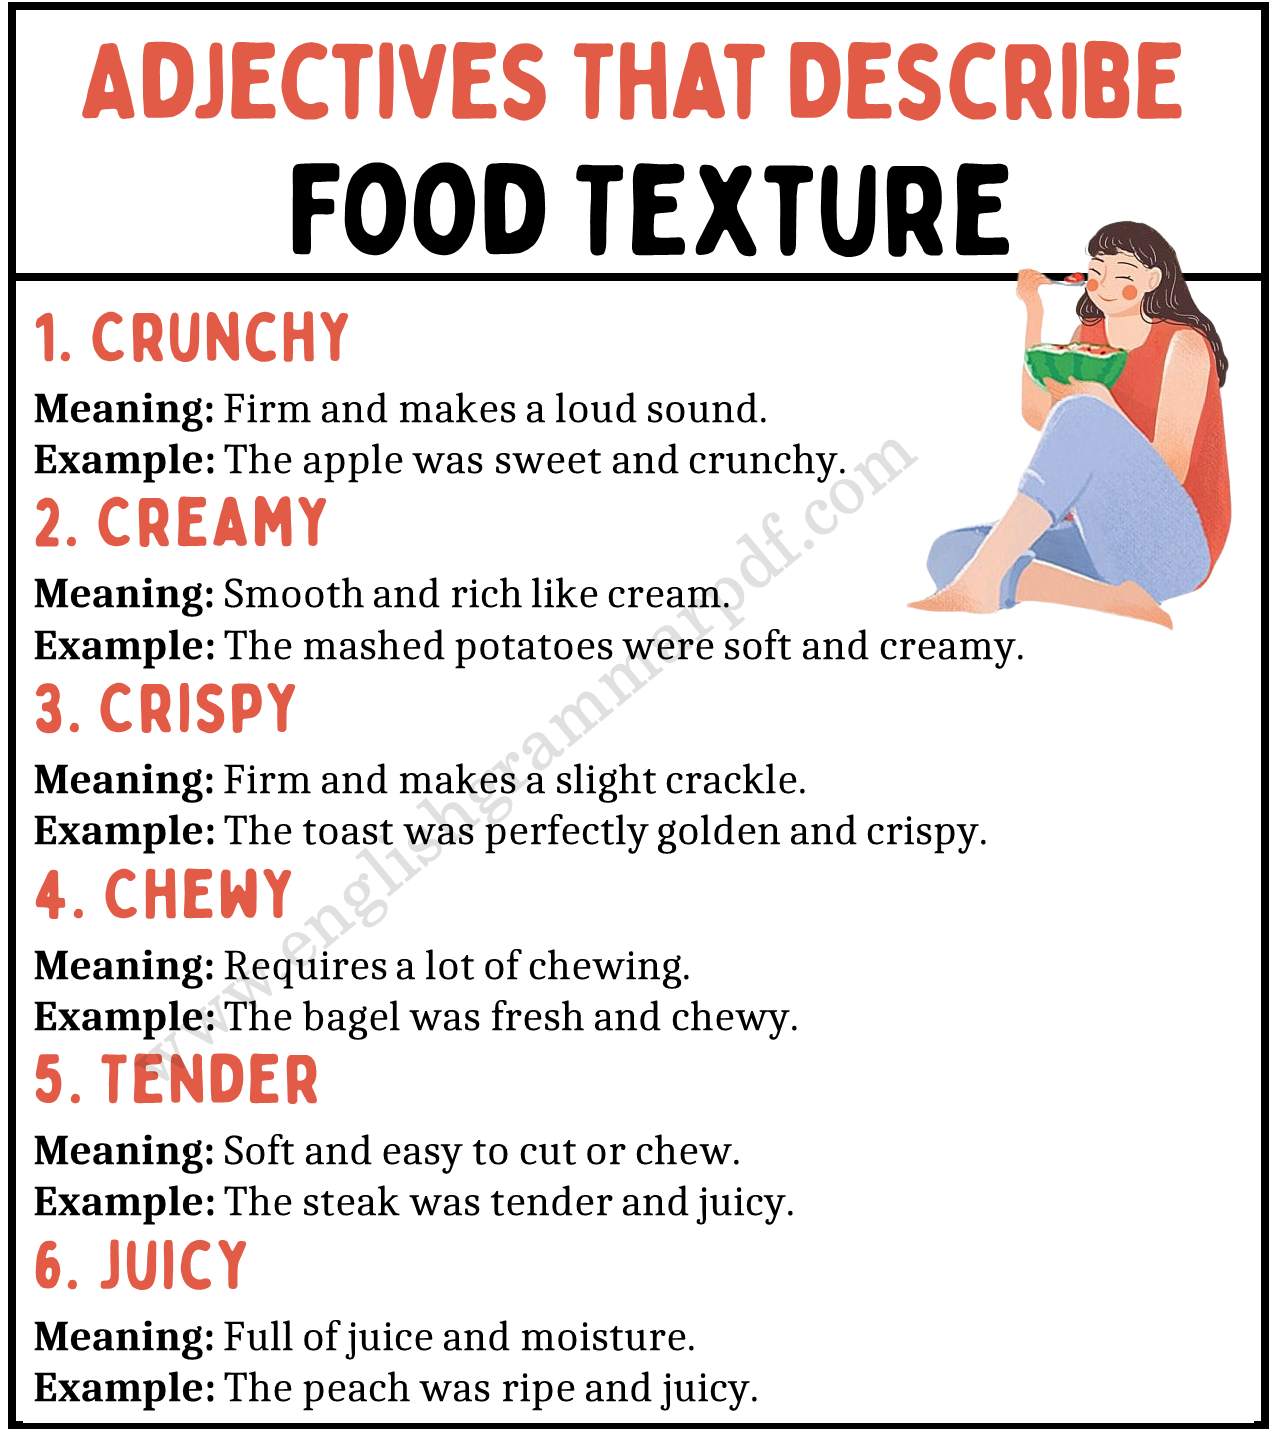 Adjectives that Describe Food Texture